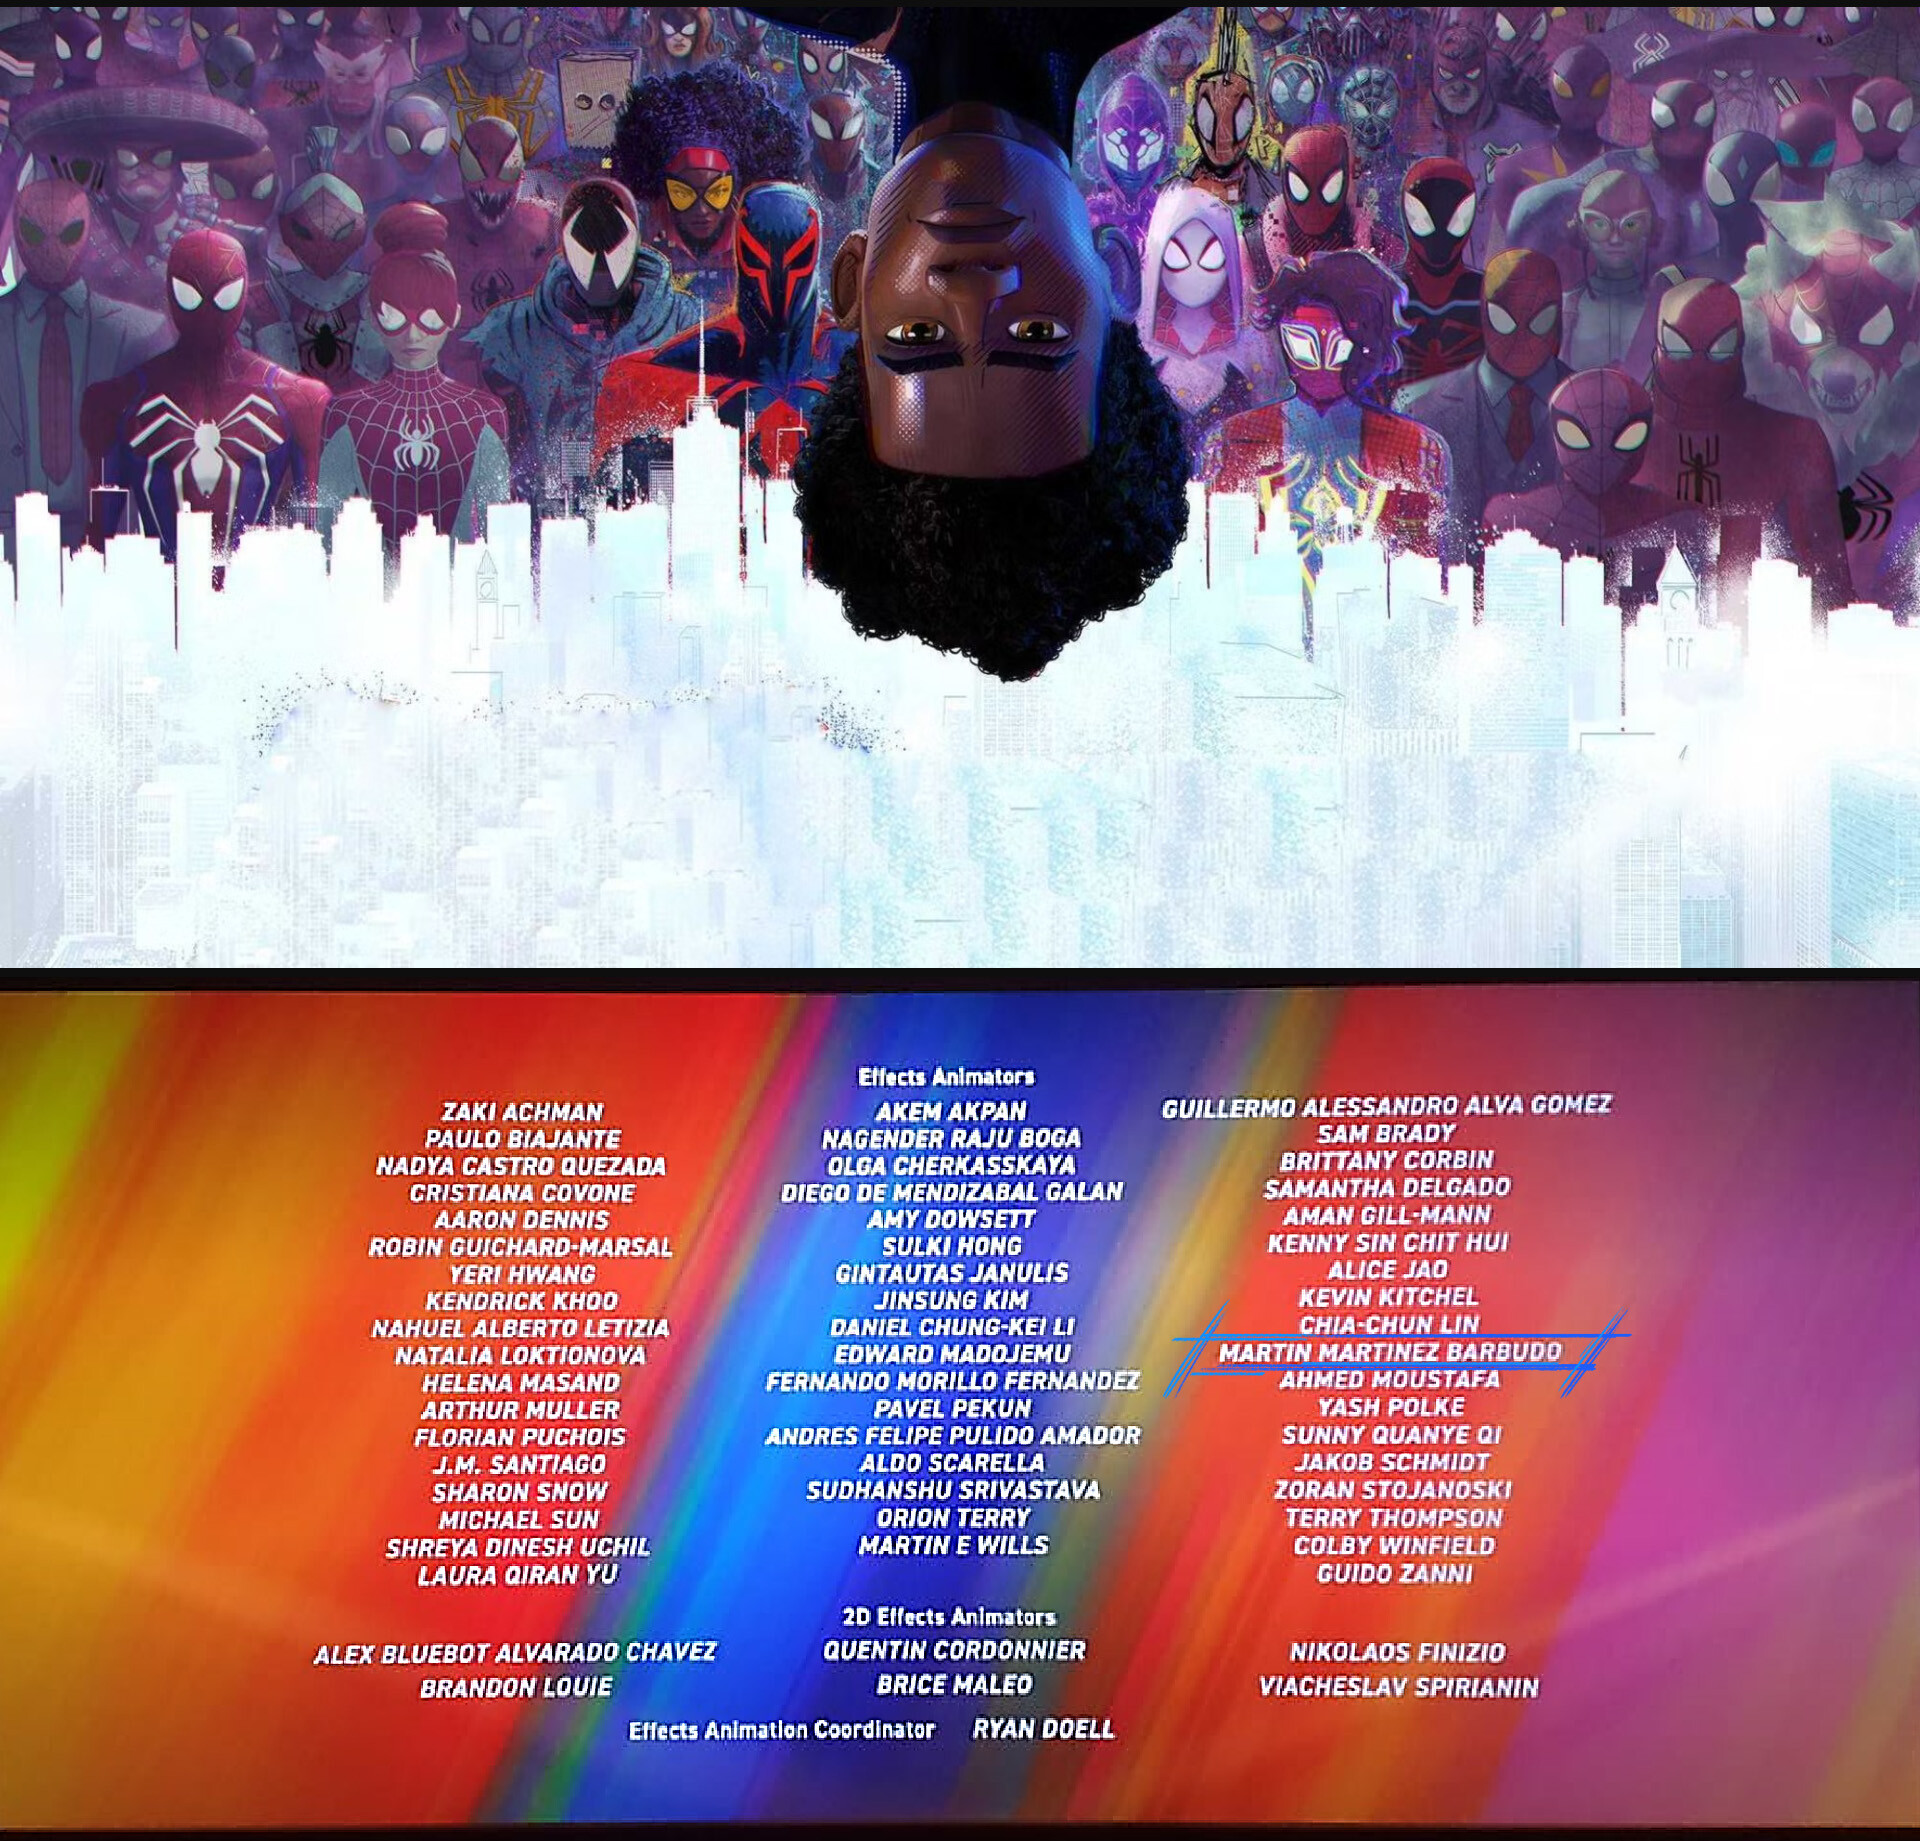 Summary and Analysis of Spider-man: Into the Spider Verse - HubPages